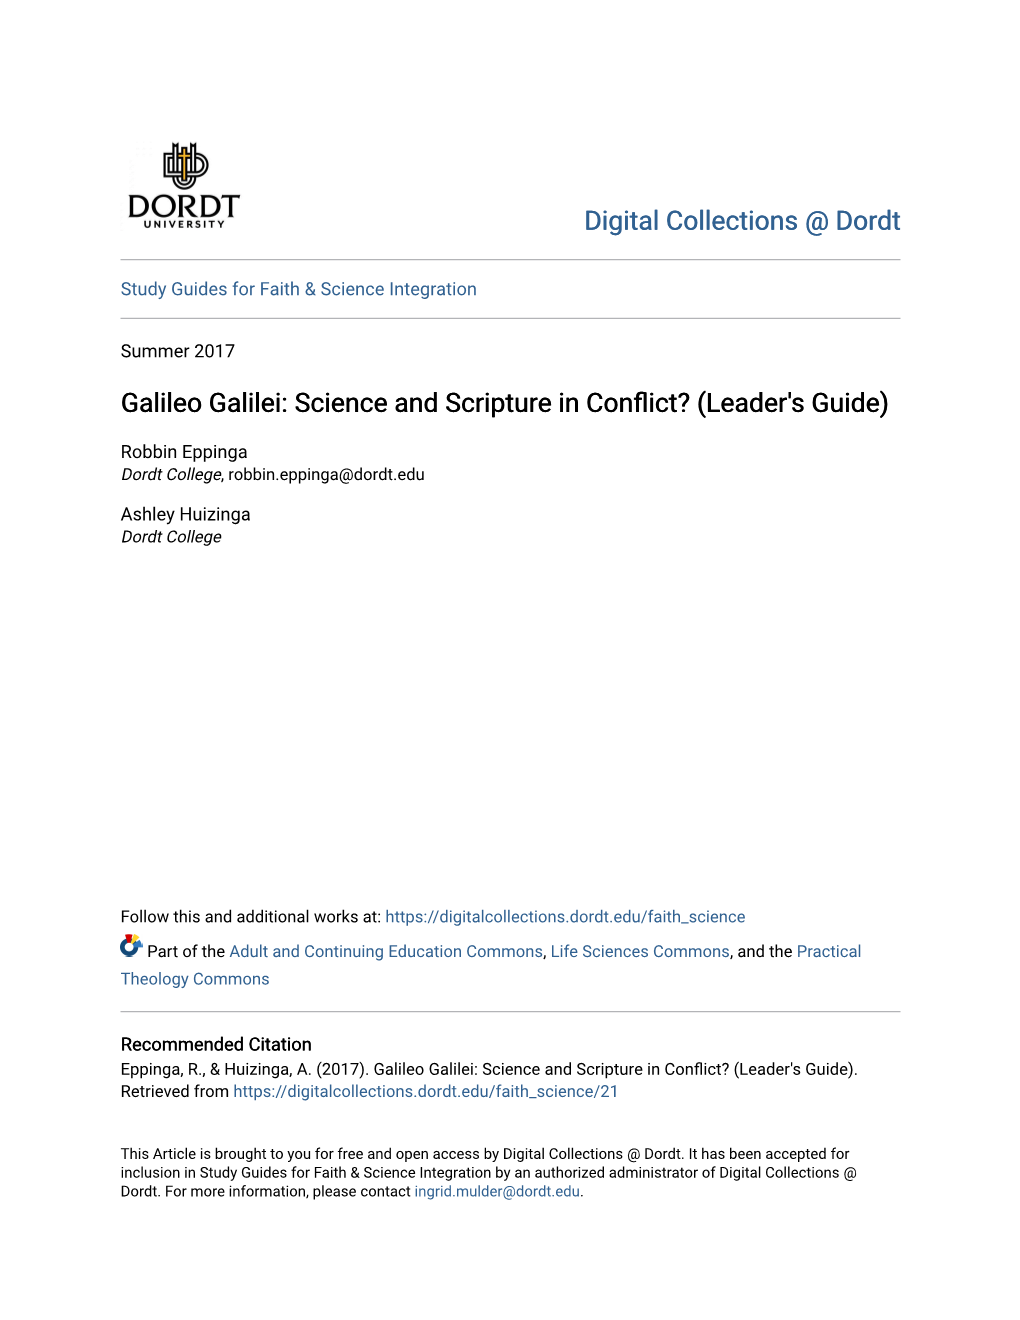 Galileo Galilei: Science and Scripture in Conflict? (Leader's Guide)